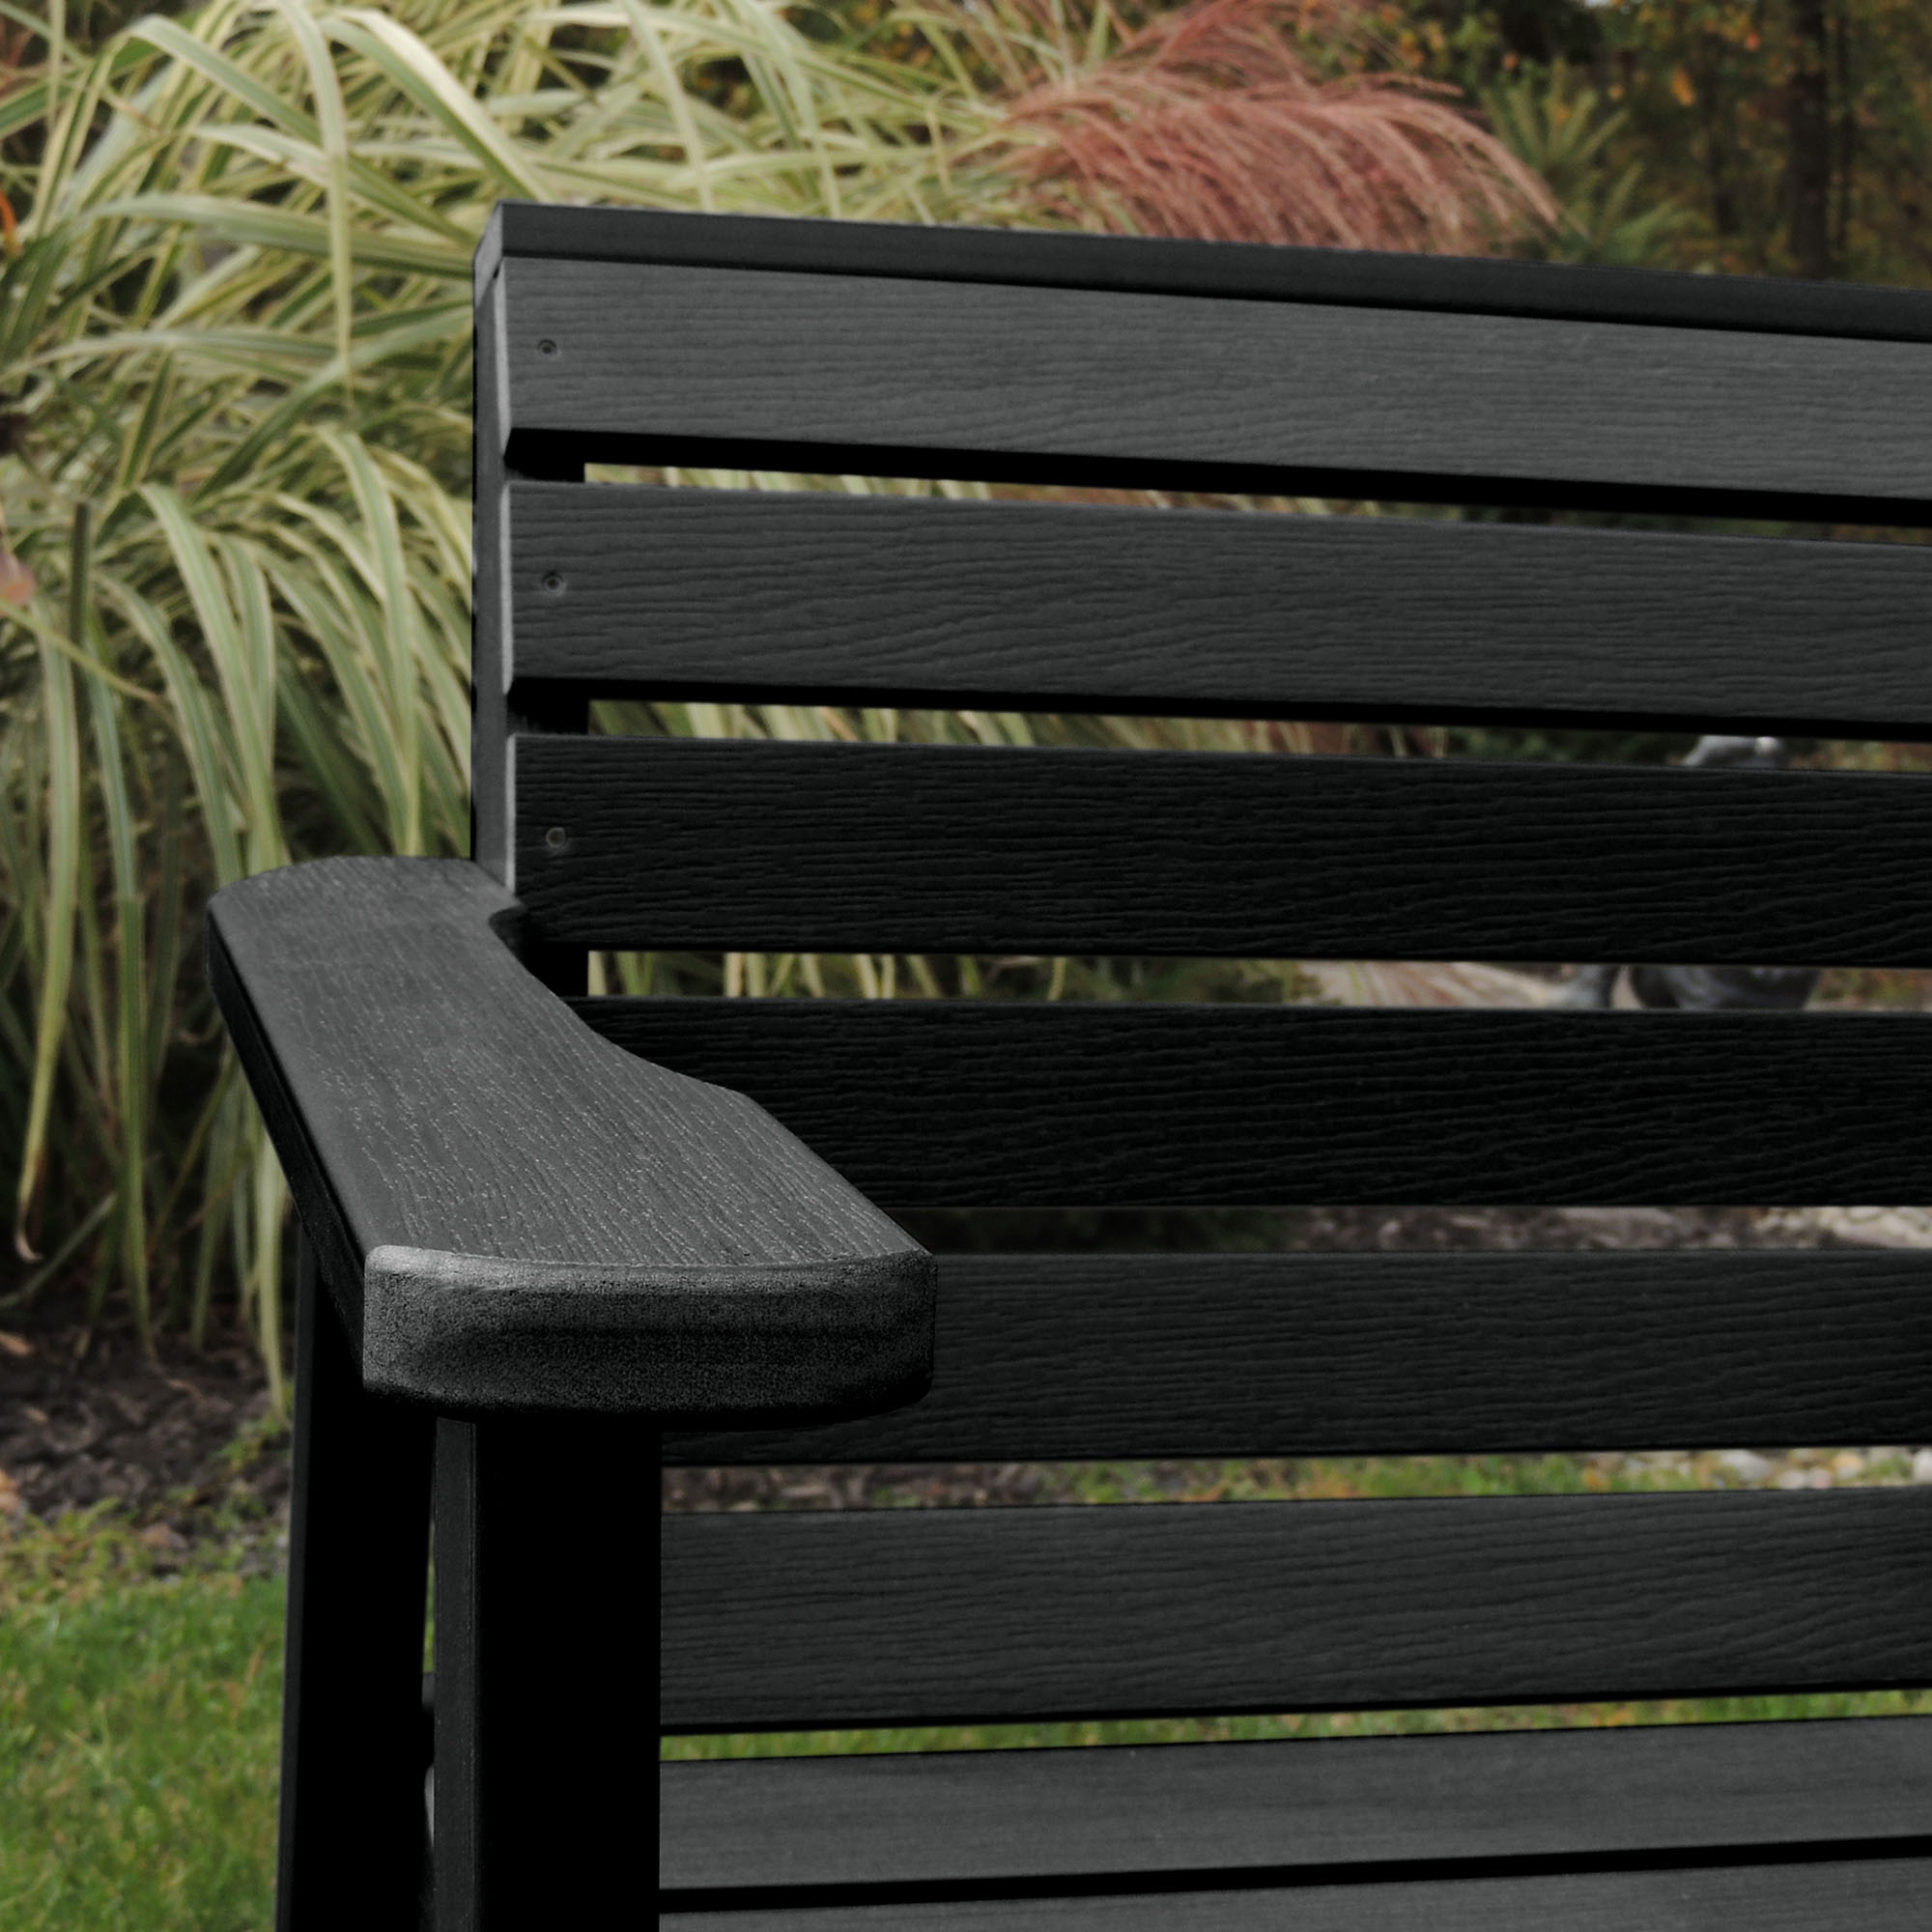 Highwood Weatherly Garden Chair - image 5 of 5